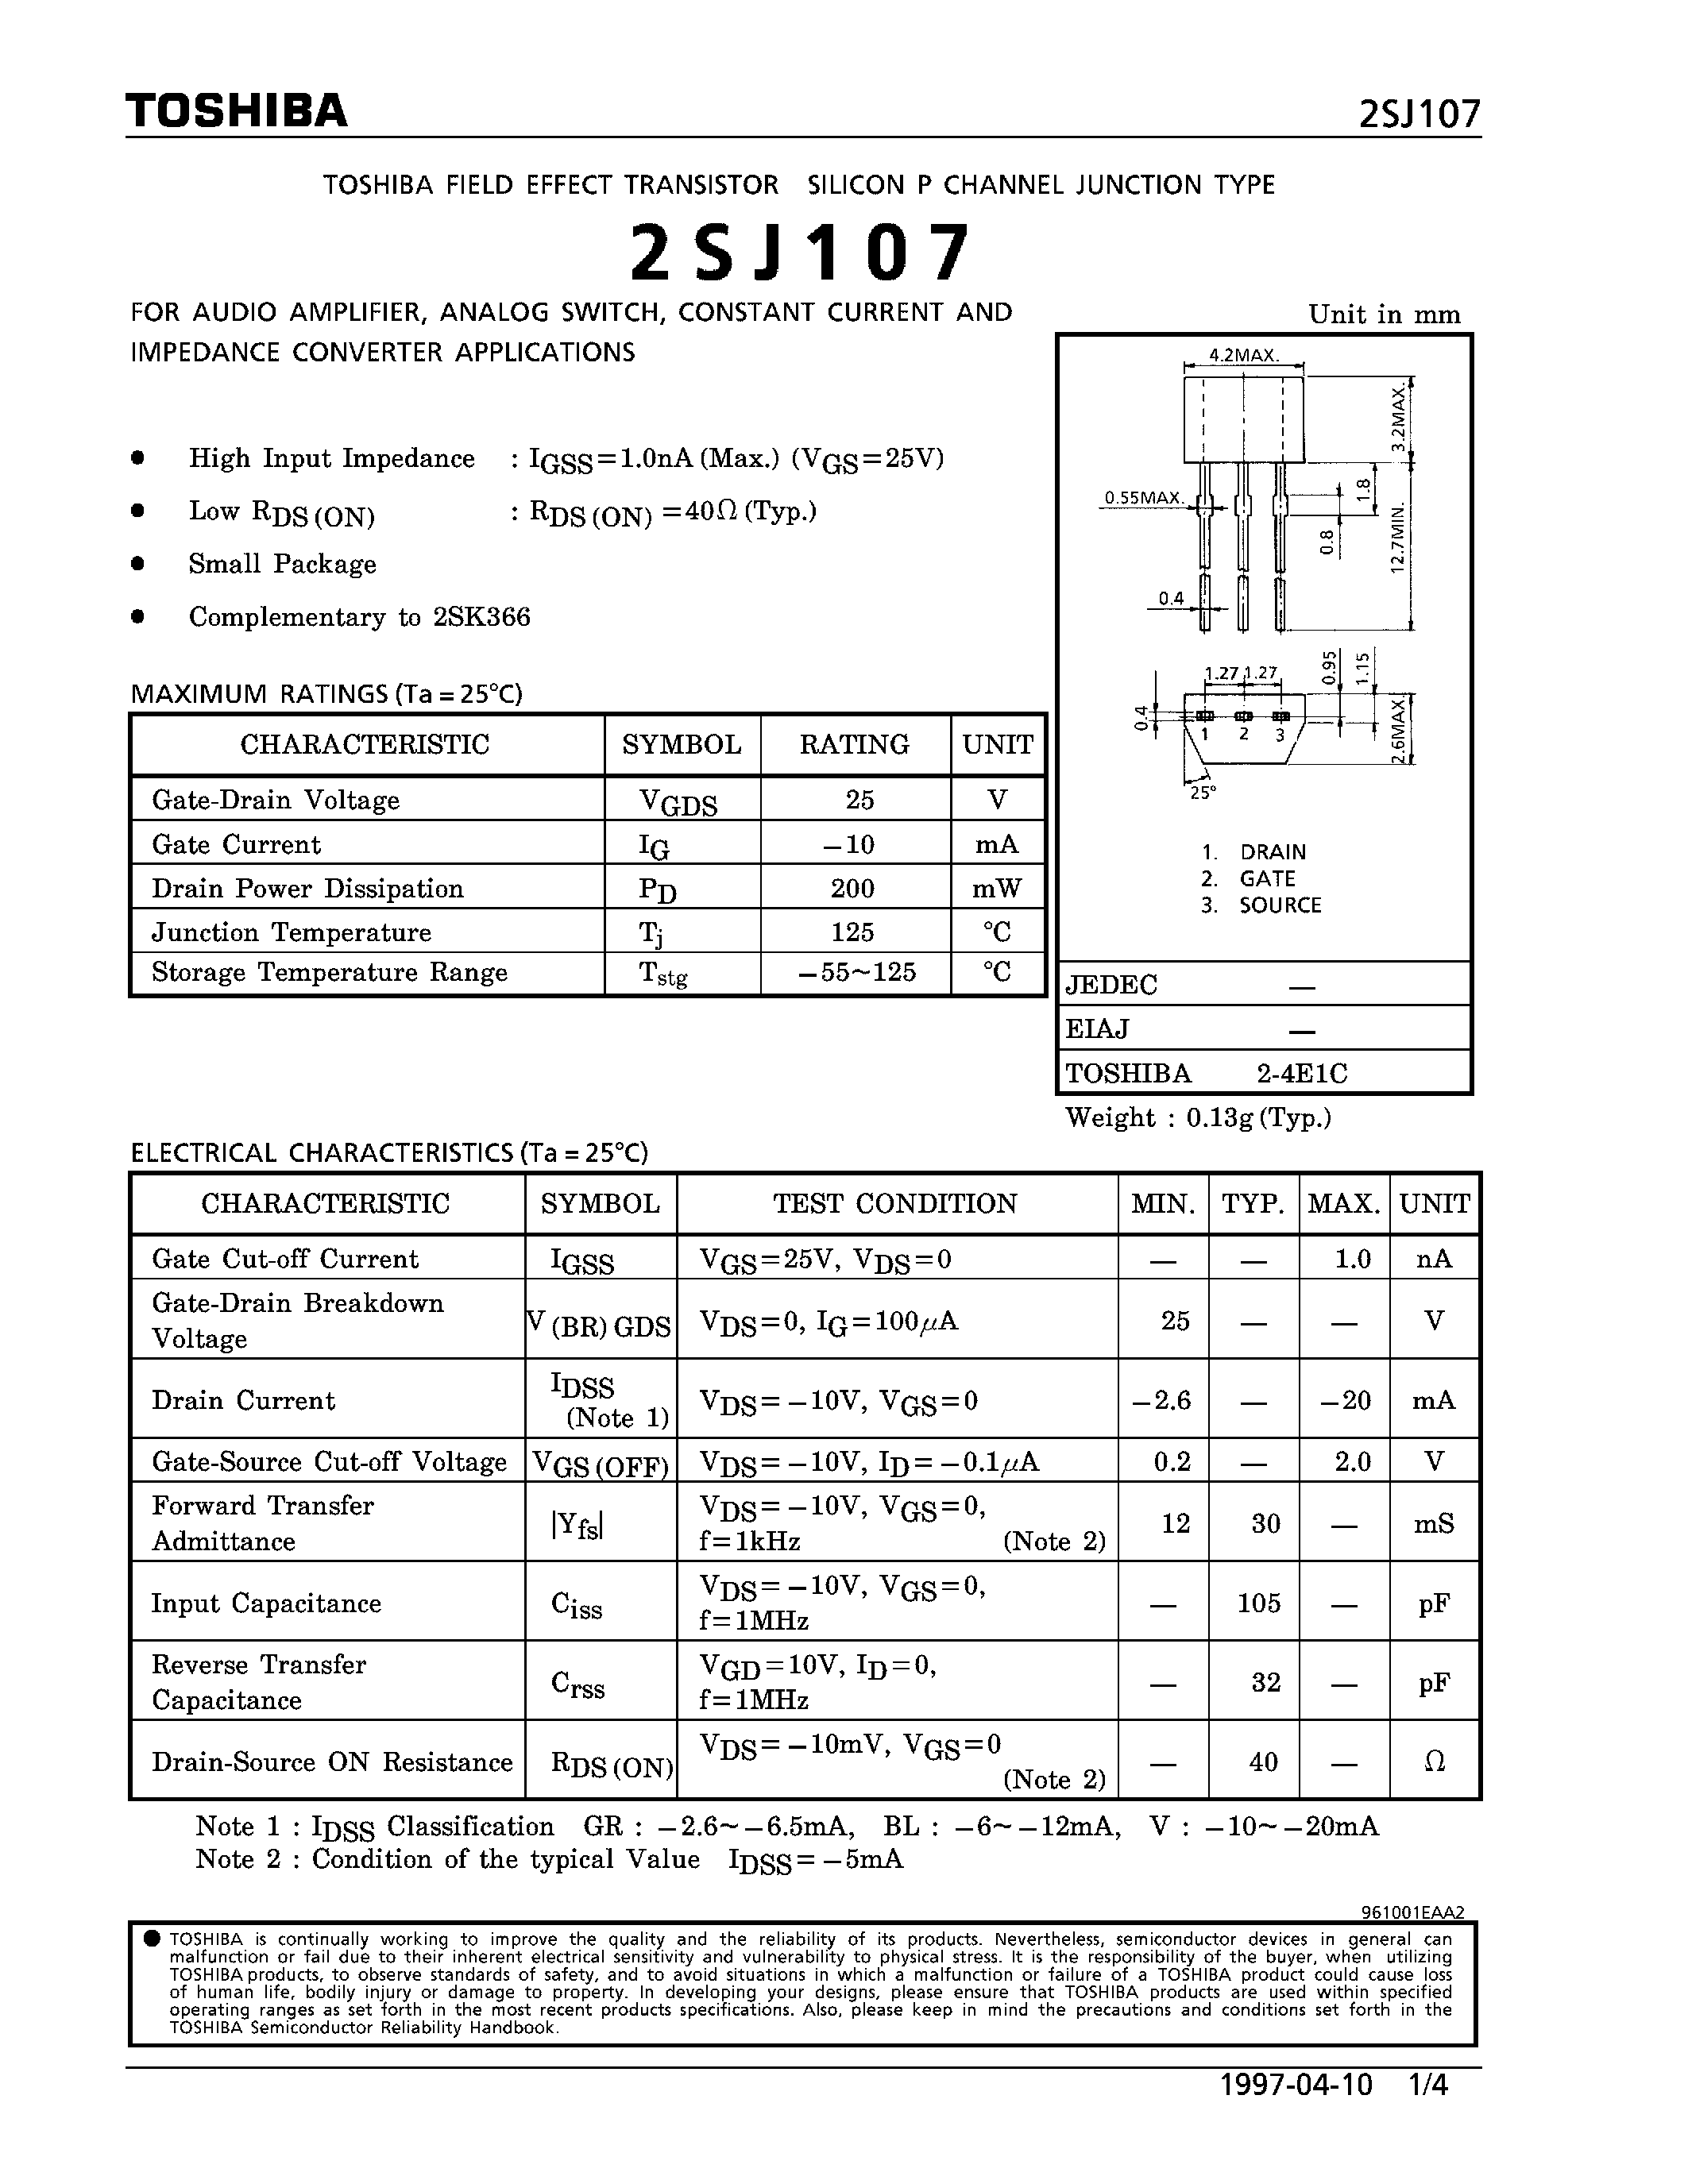 Datasheet 2SJ107 - P CHANNEL JUNCTION TYPE (FOR AUDIO AMPLIFIER/ ANALOG SWITCH/ CONSTANT CURRENT AND IMPEDANCE CONVERTER APPLICATIONS) page 1